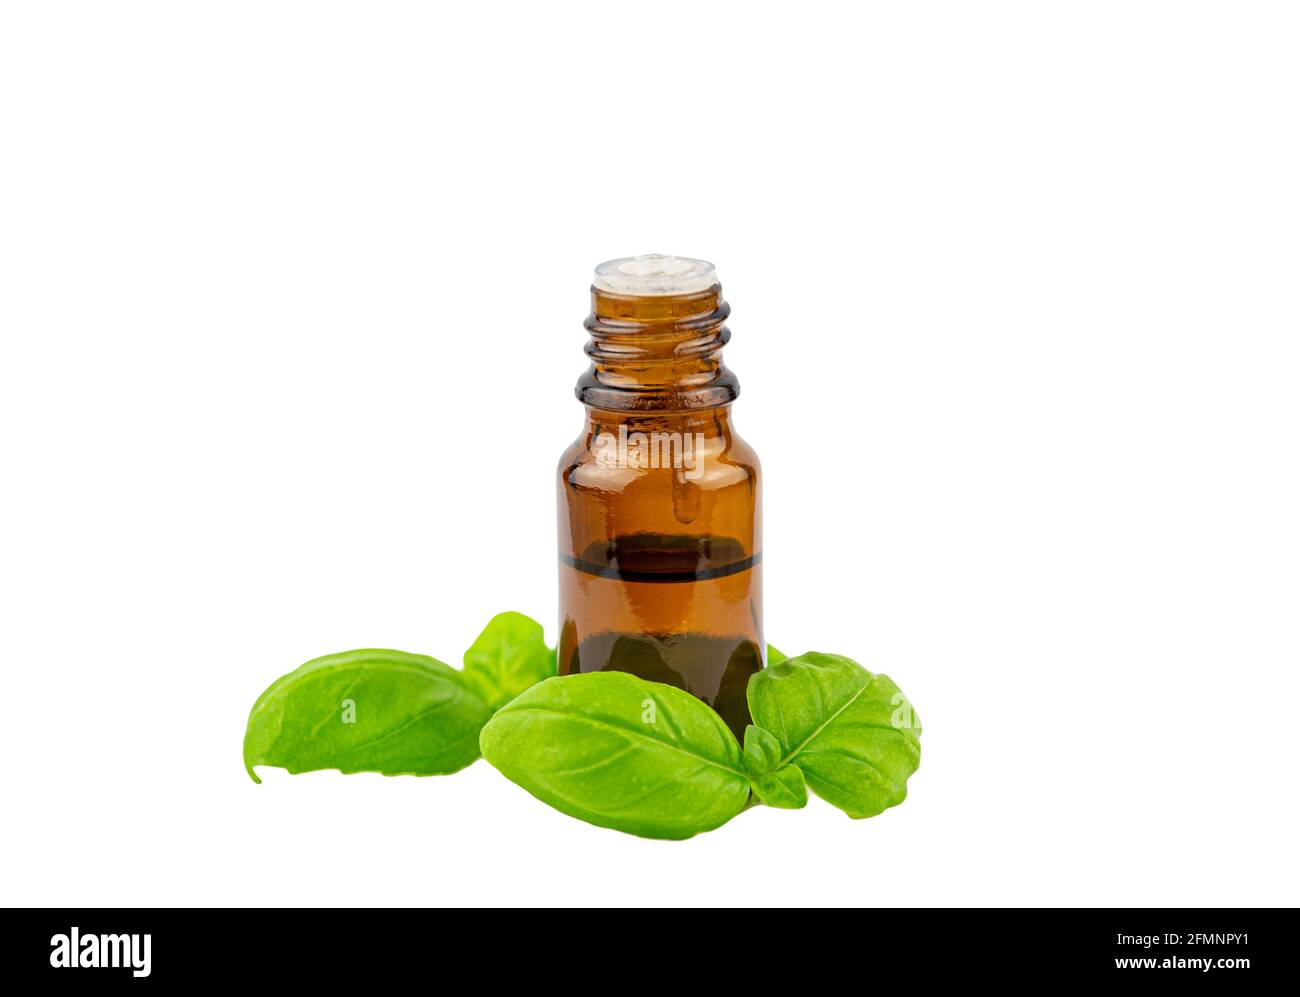 Basil Ocimum basilicum essential oil bottle with green basil leaf next to it, isolated on white background, lot of copy space, studio shot. Stock Photo